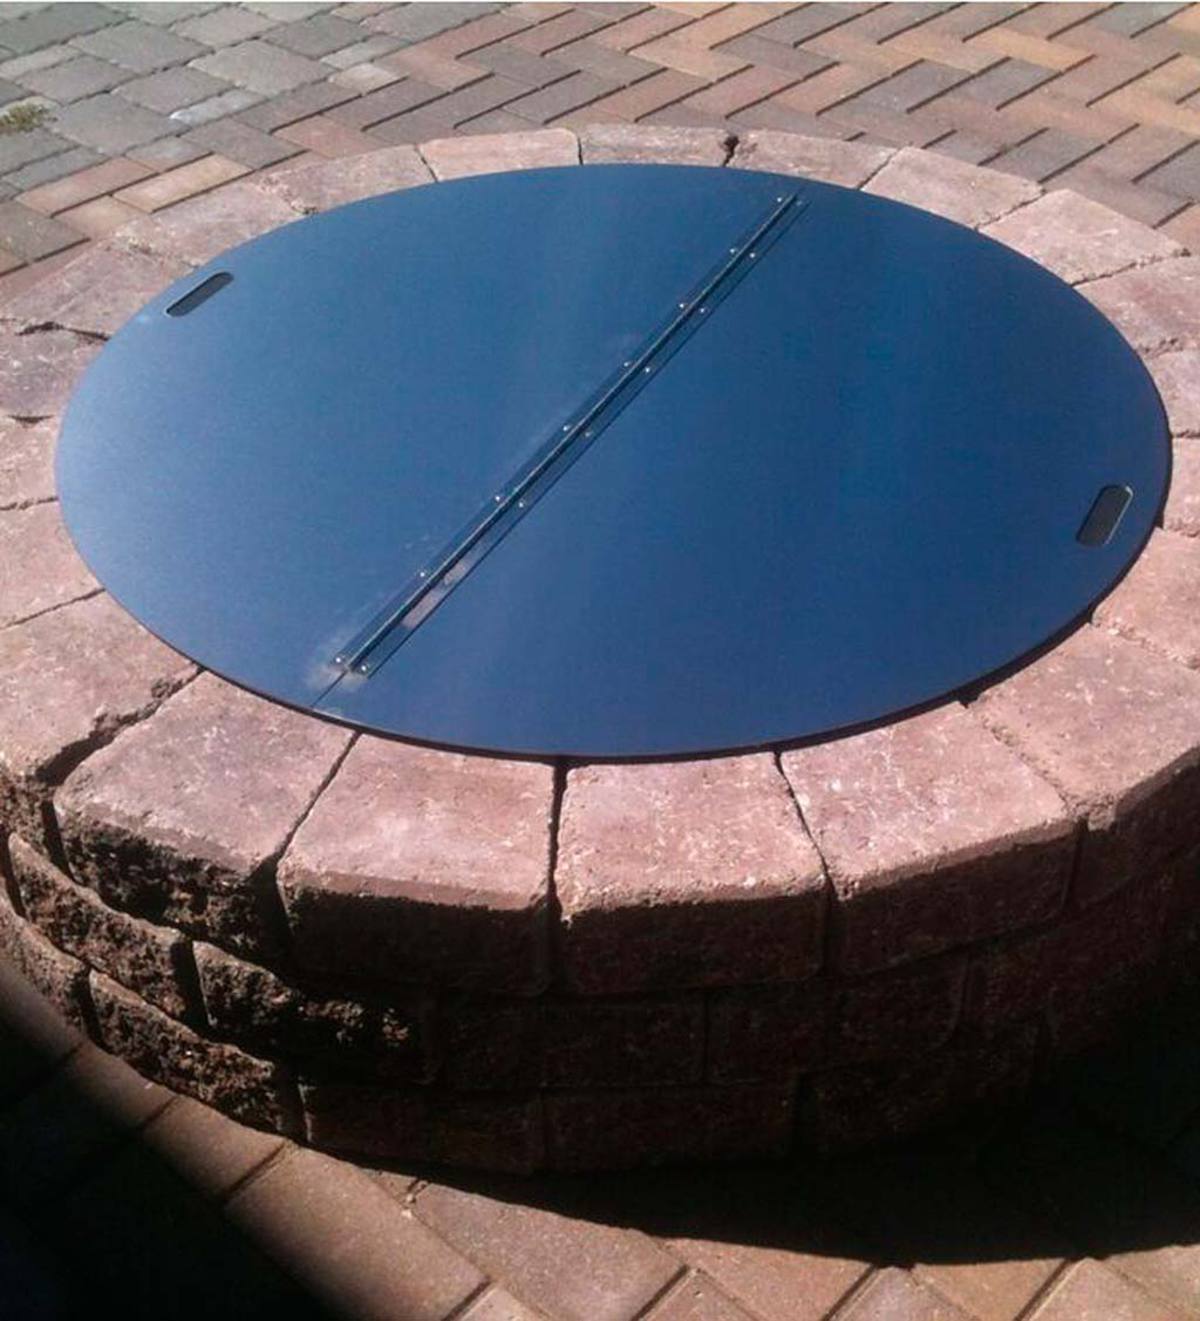 Stainless Steel Round Fire Pit Cover, Round Snuffer Fire Pit Cover